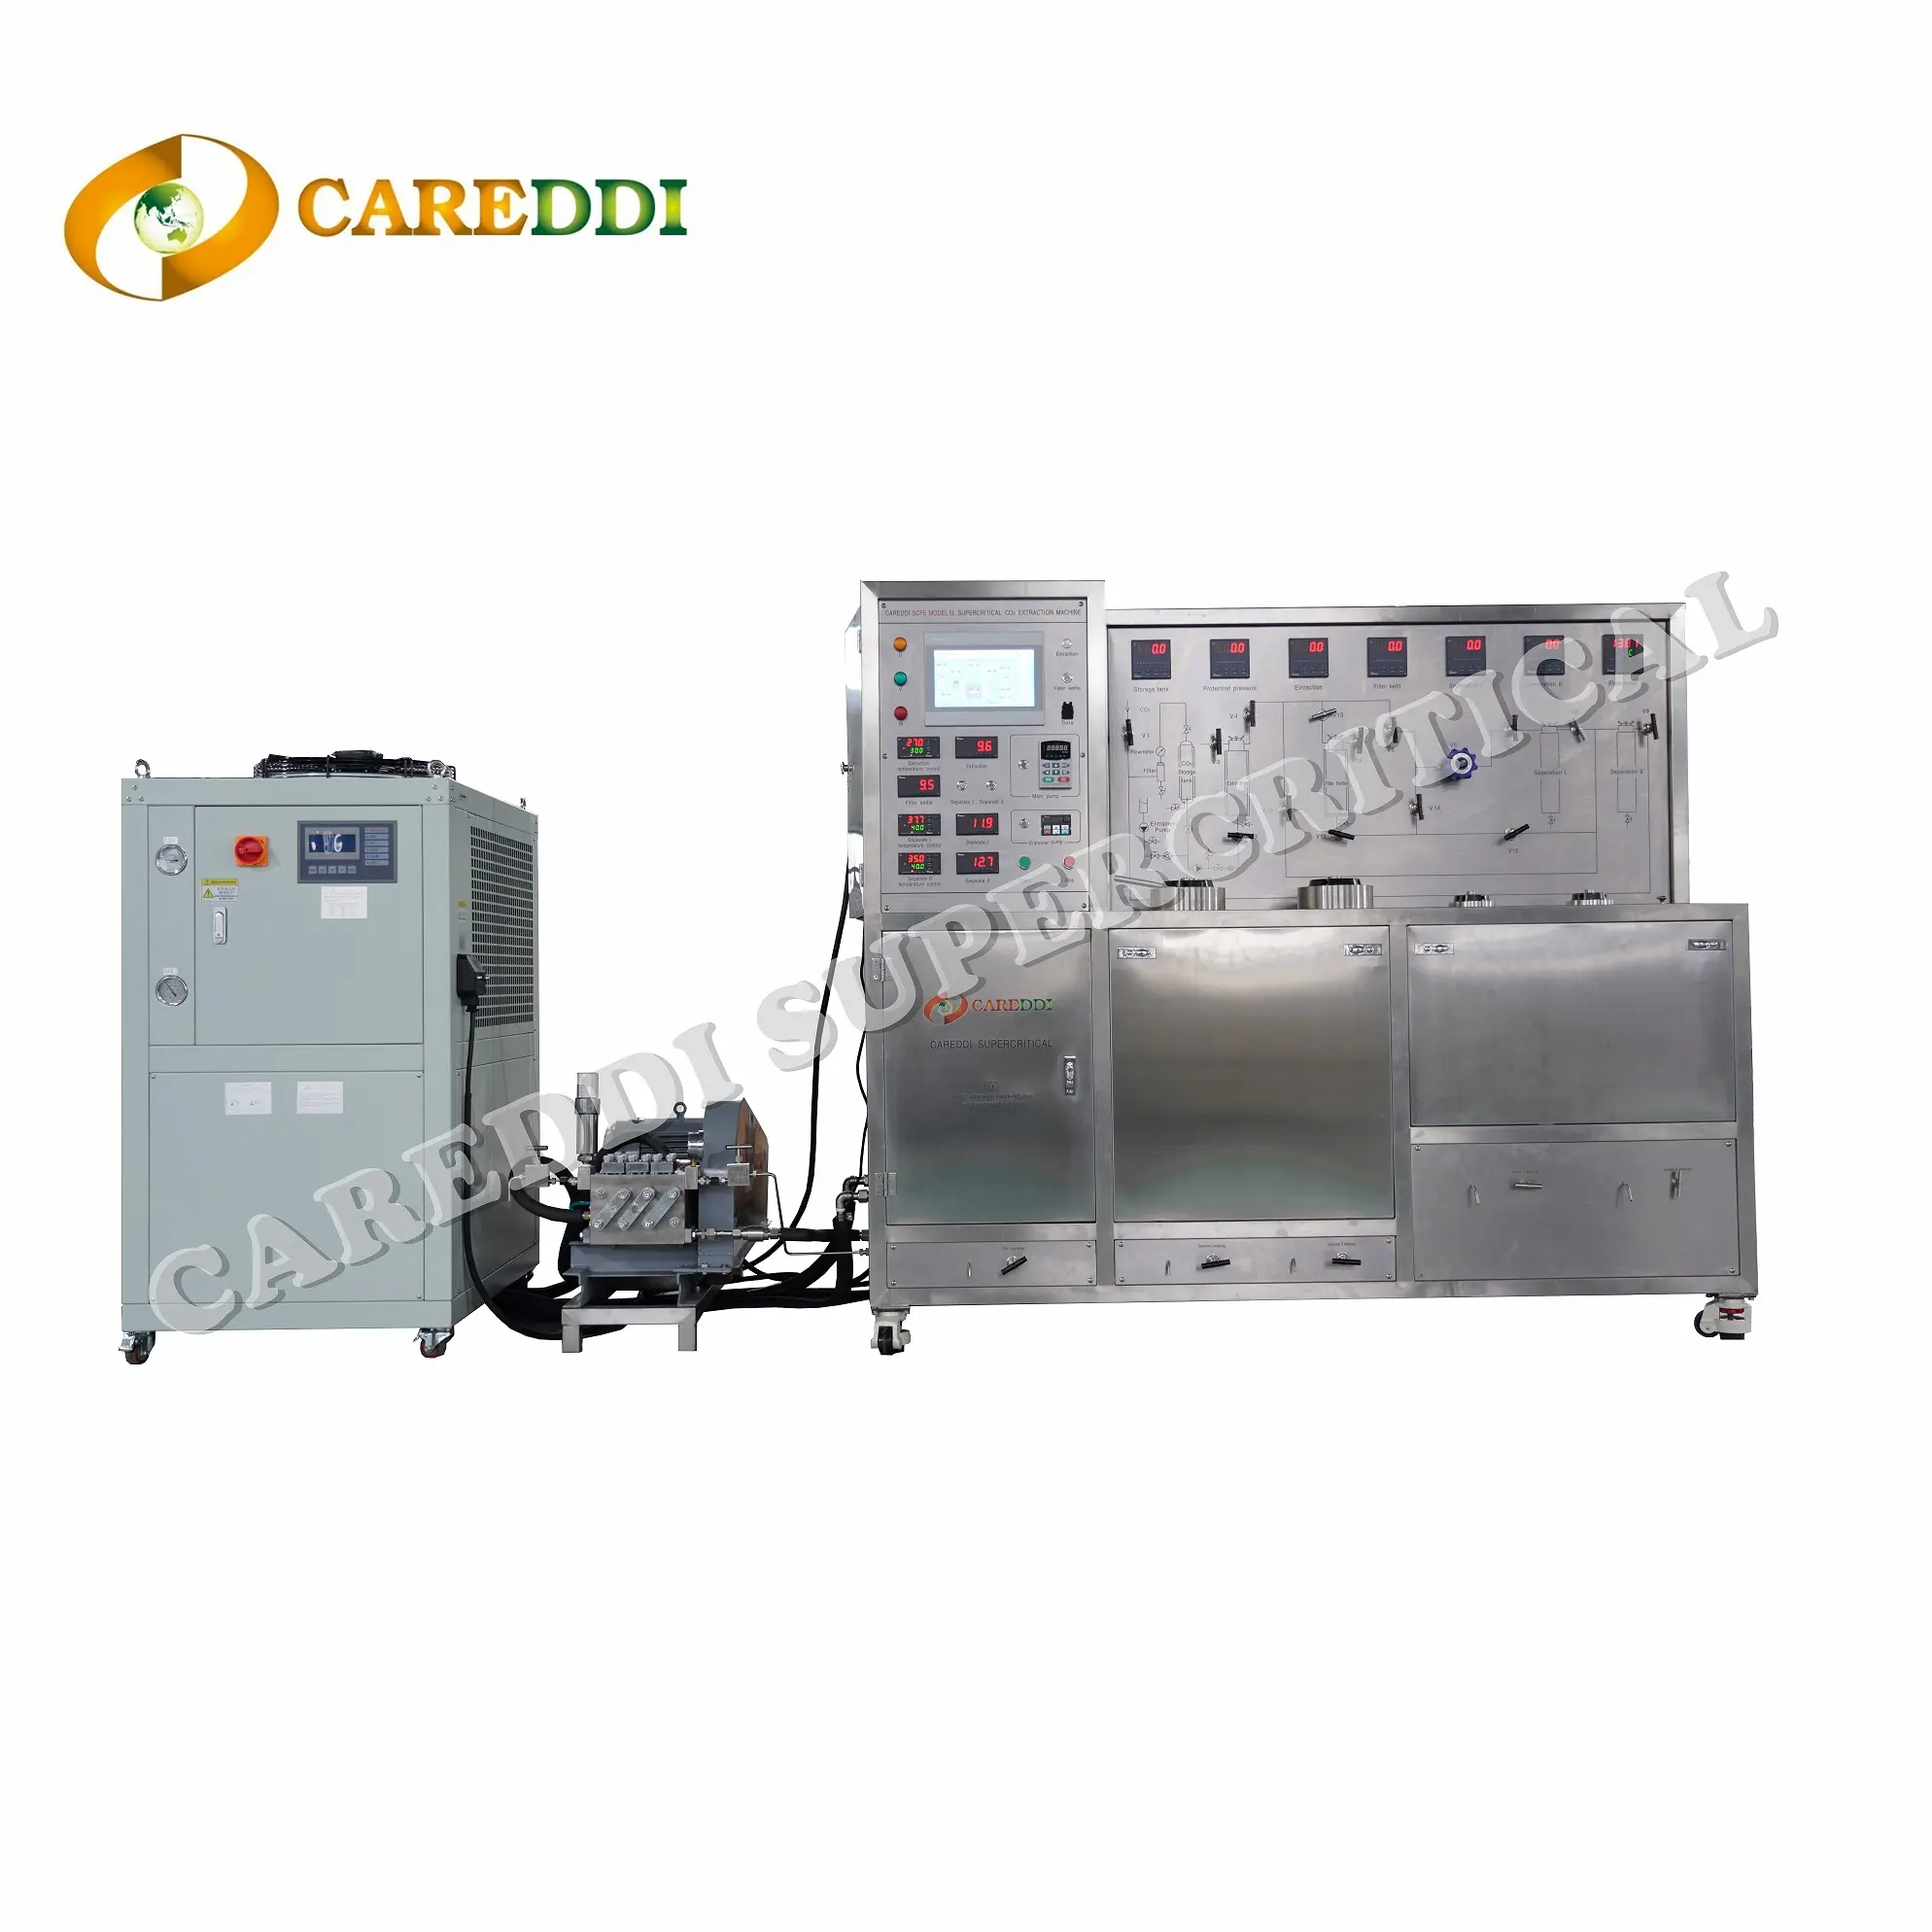 Co2 Extraction Equipment Lab Scale 5 Liter Supercritical CO2 Extraction Machine CBD Hemp Essential Oil Extraction Equipment